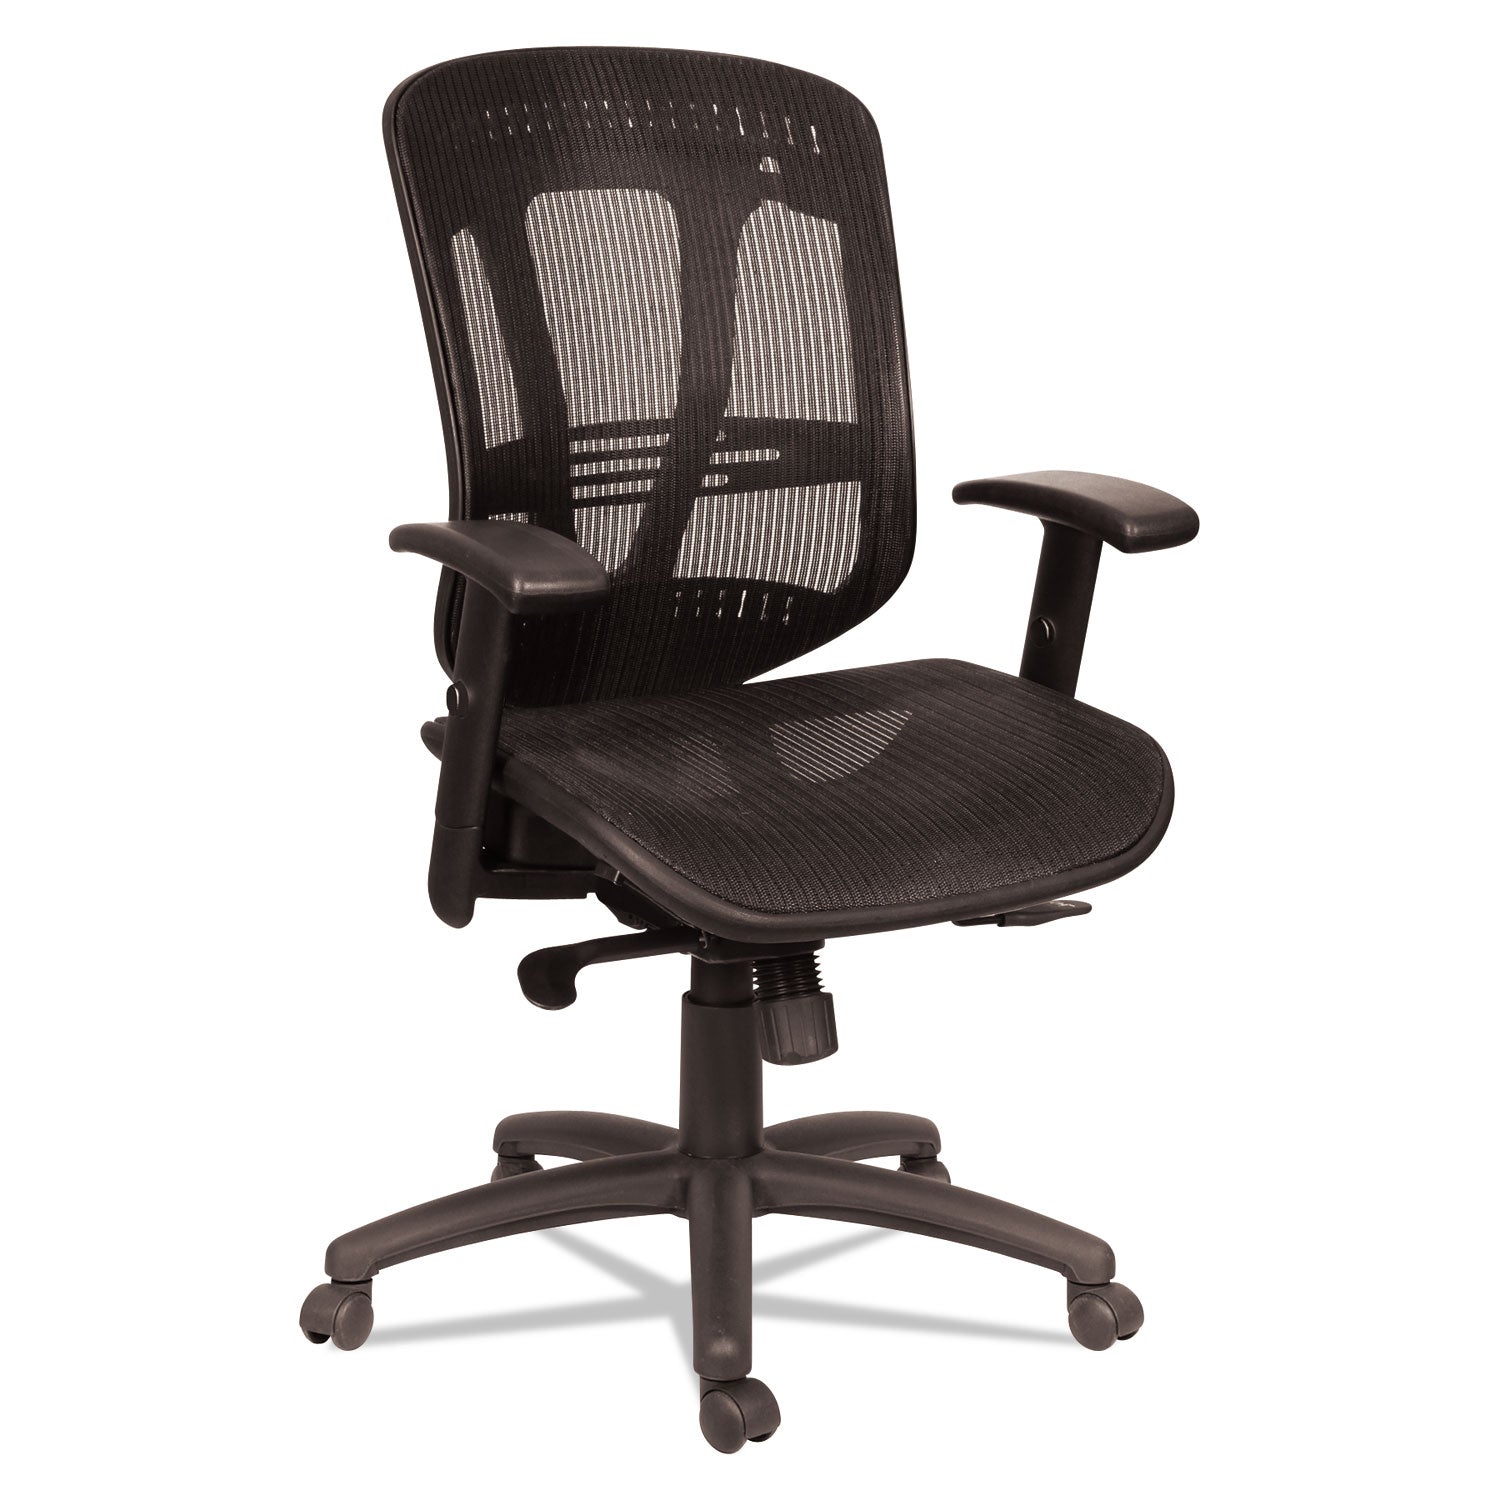 Alera Eon Series Multifunction Mid-Back Suspension Mesh Chair, Supports Up to 275 lb, 17.51" to 21.25" Seat Height, Black - 